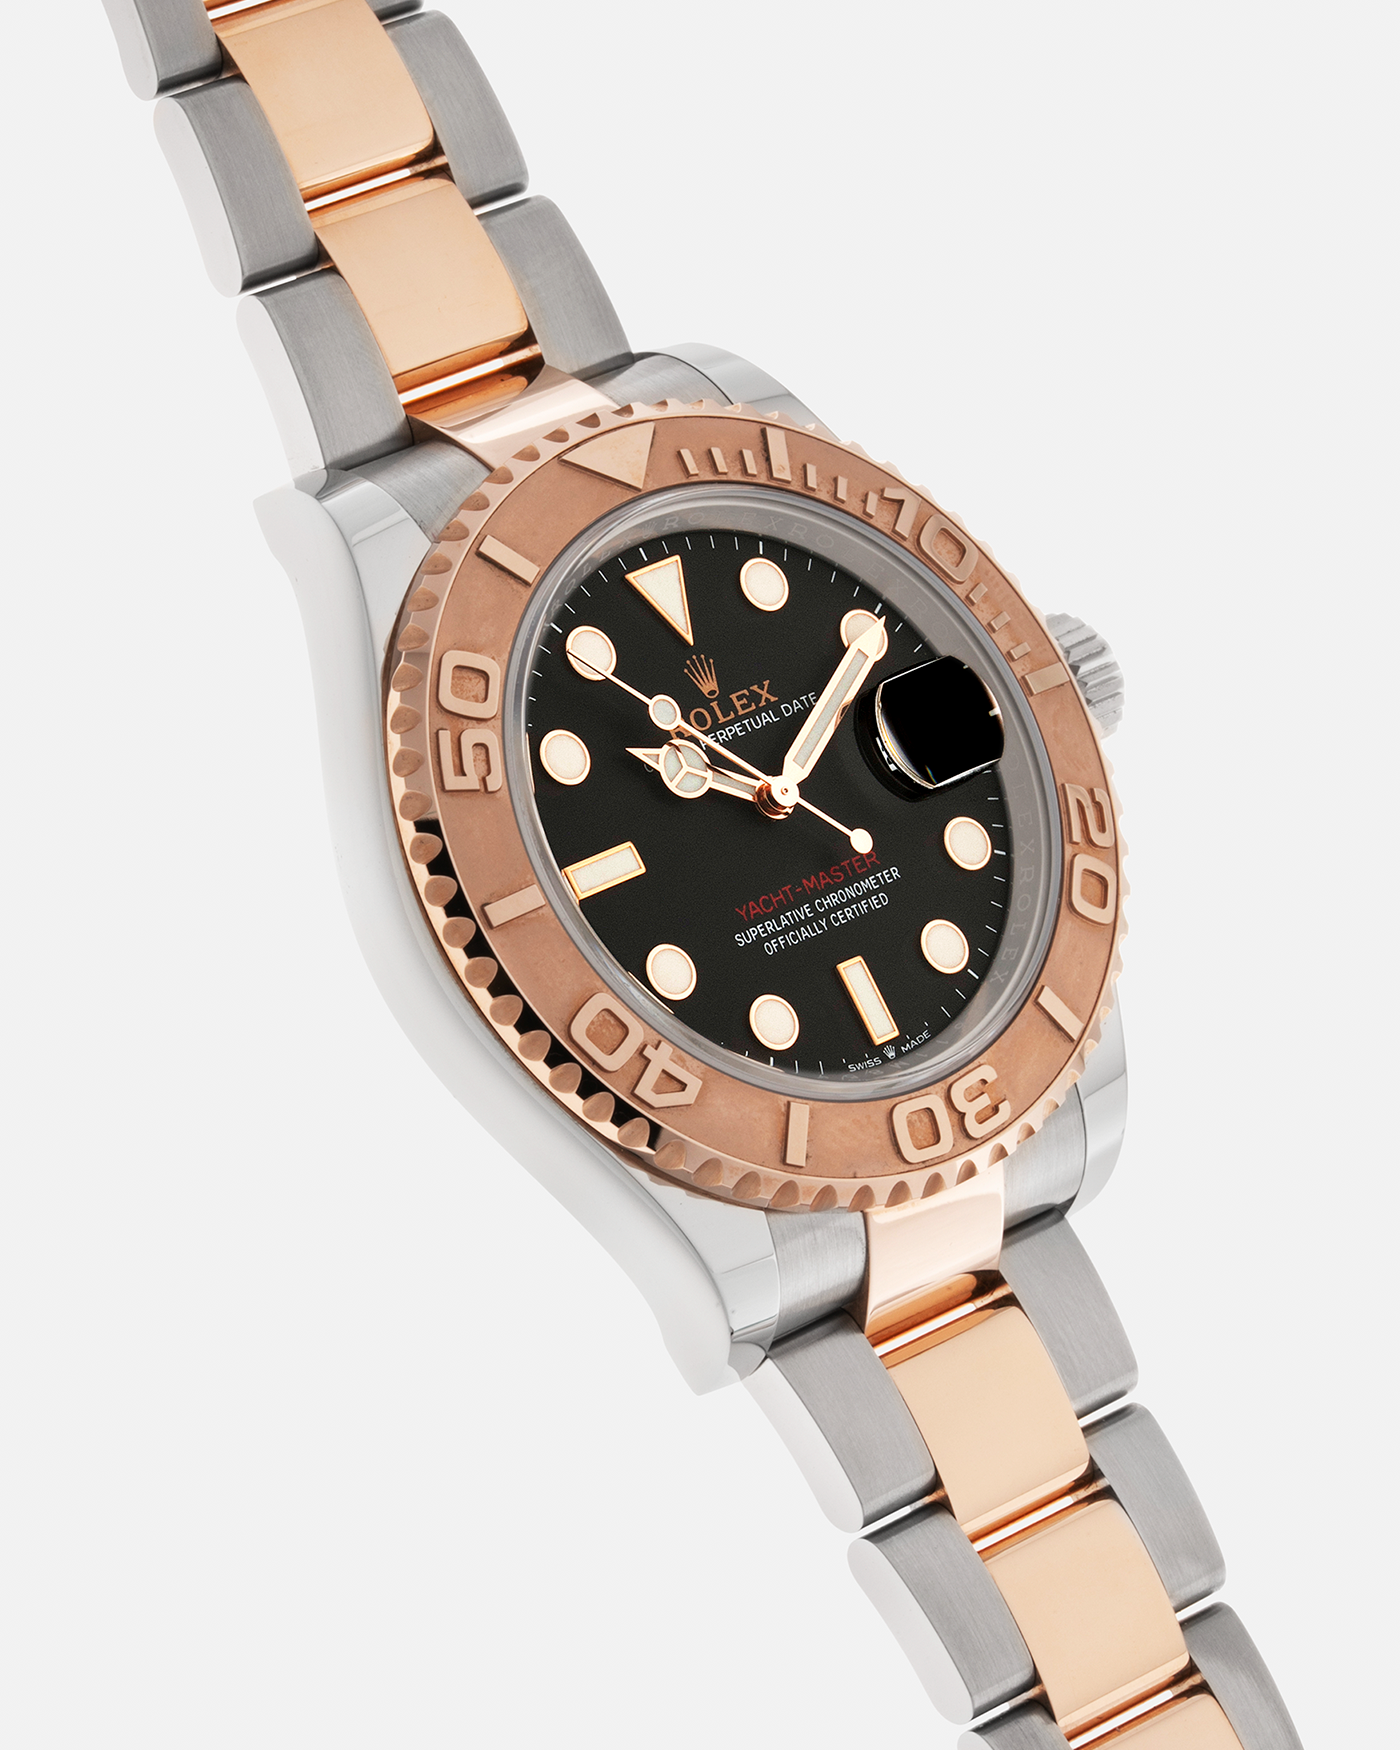 Brand: Rolex Year: 2021 Model: Yacht-Master 40 Reference Number: 116621 Material: Two Tone 904L Stainless Steel and 18-carat Everose Gold (Everose Rolesor) Movement: Rolex Cal. 3135, Self-Winding Case Diameter: 40mm Lug Width: 20mm Bracelet: Rolex Everose Rolesor Two-Tone Oyster Bracelet with Folding Oysterlock Safety Clasp and Easylink Extension System